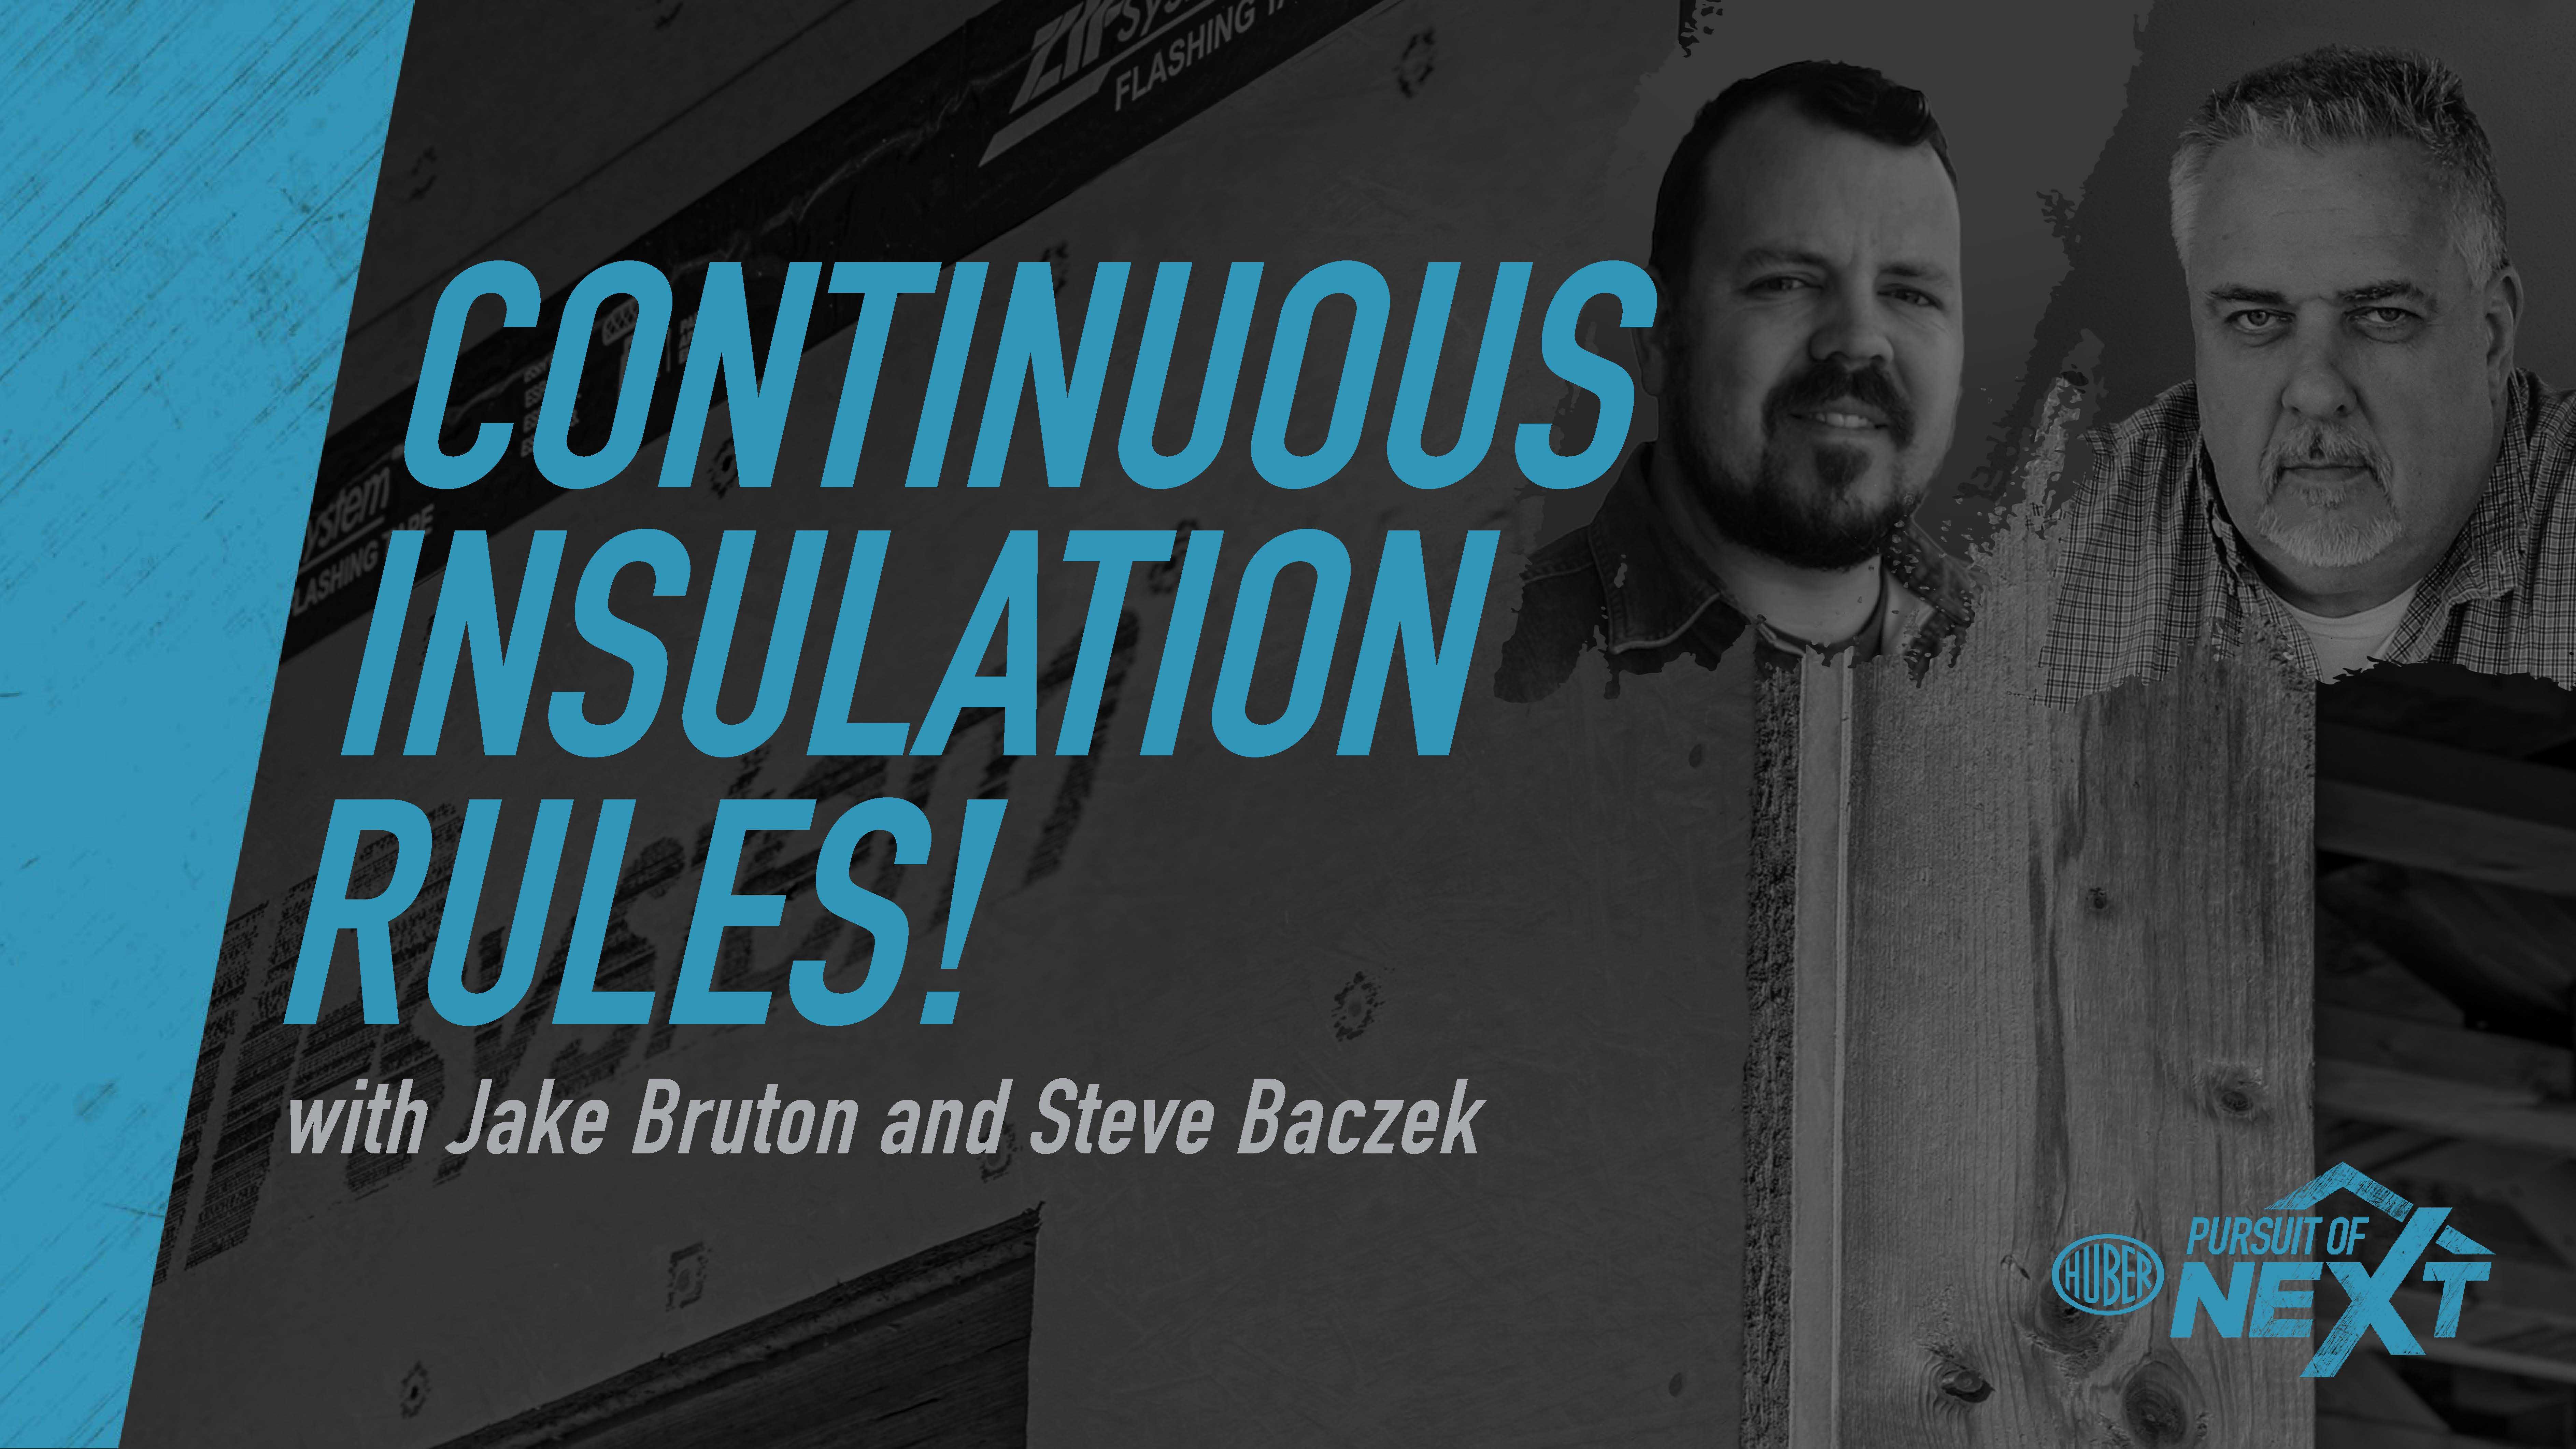 Continuous Insulation Rules!